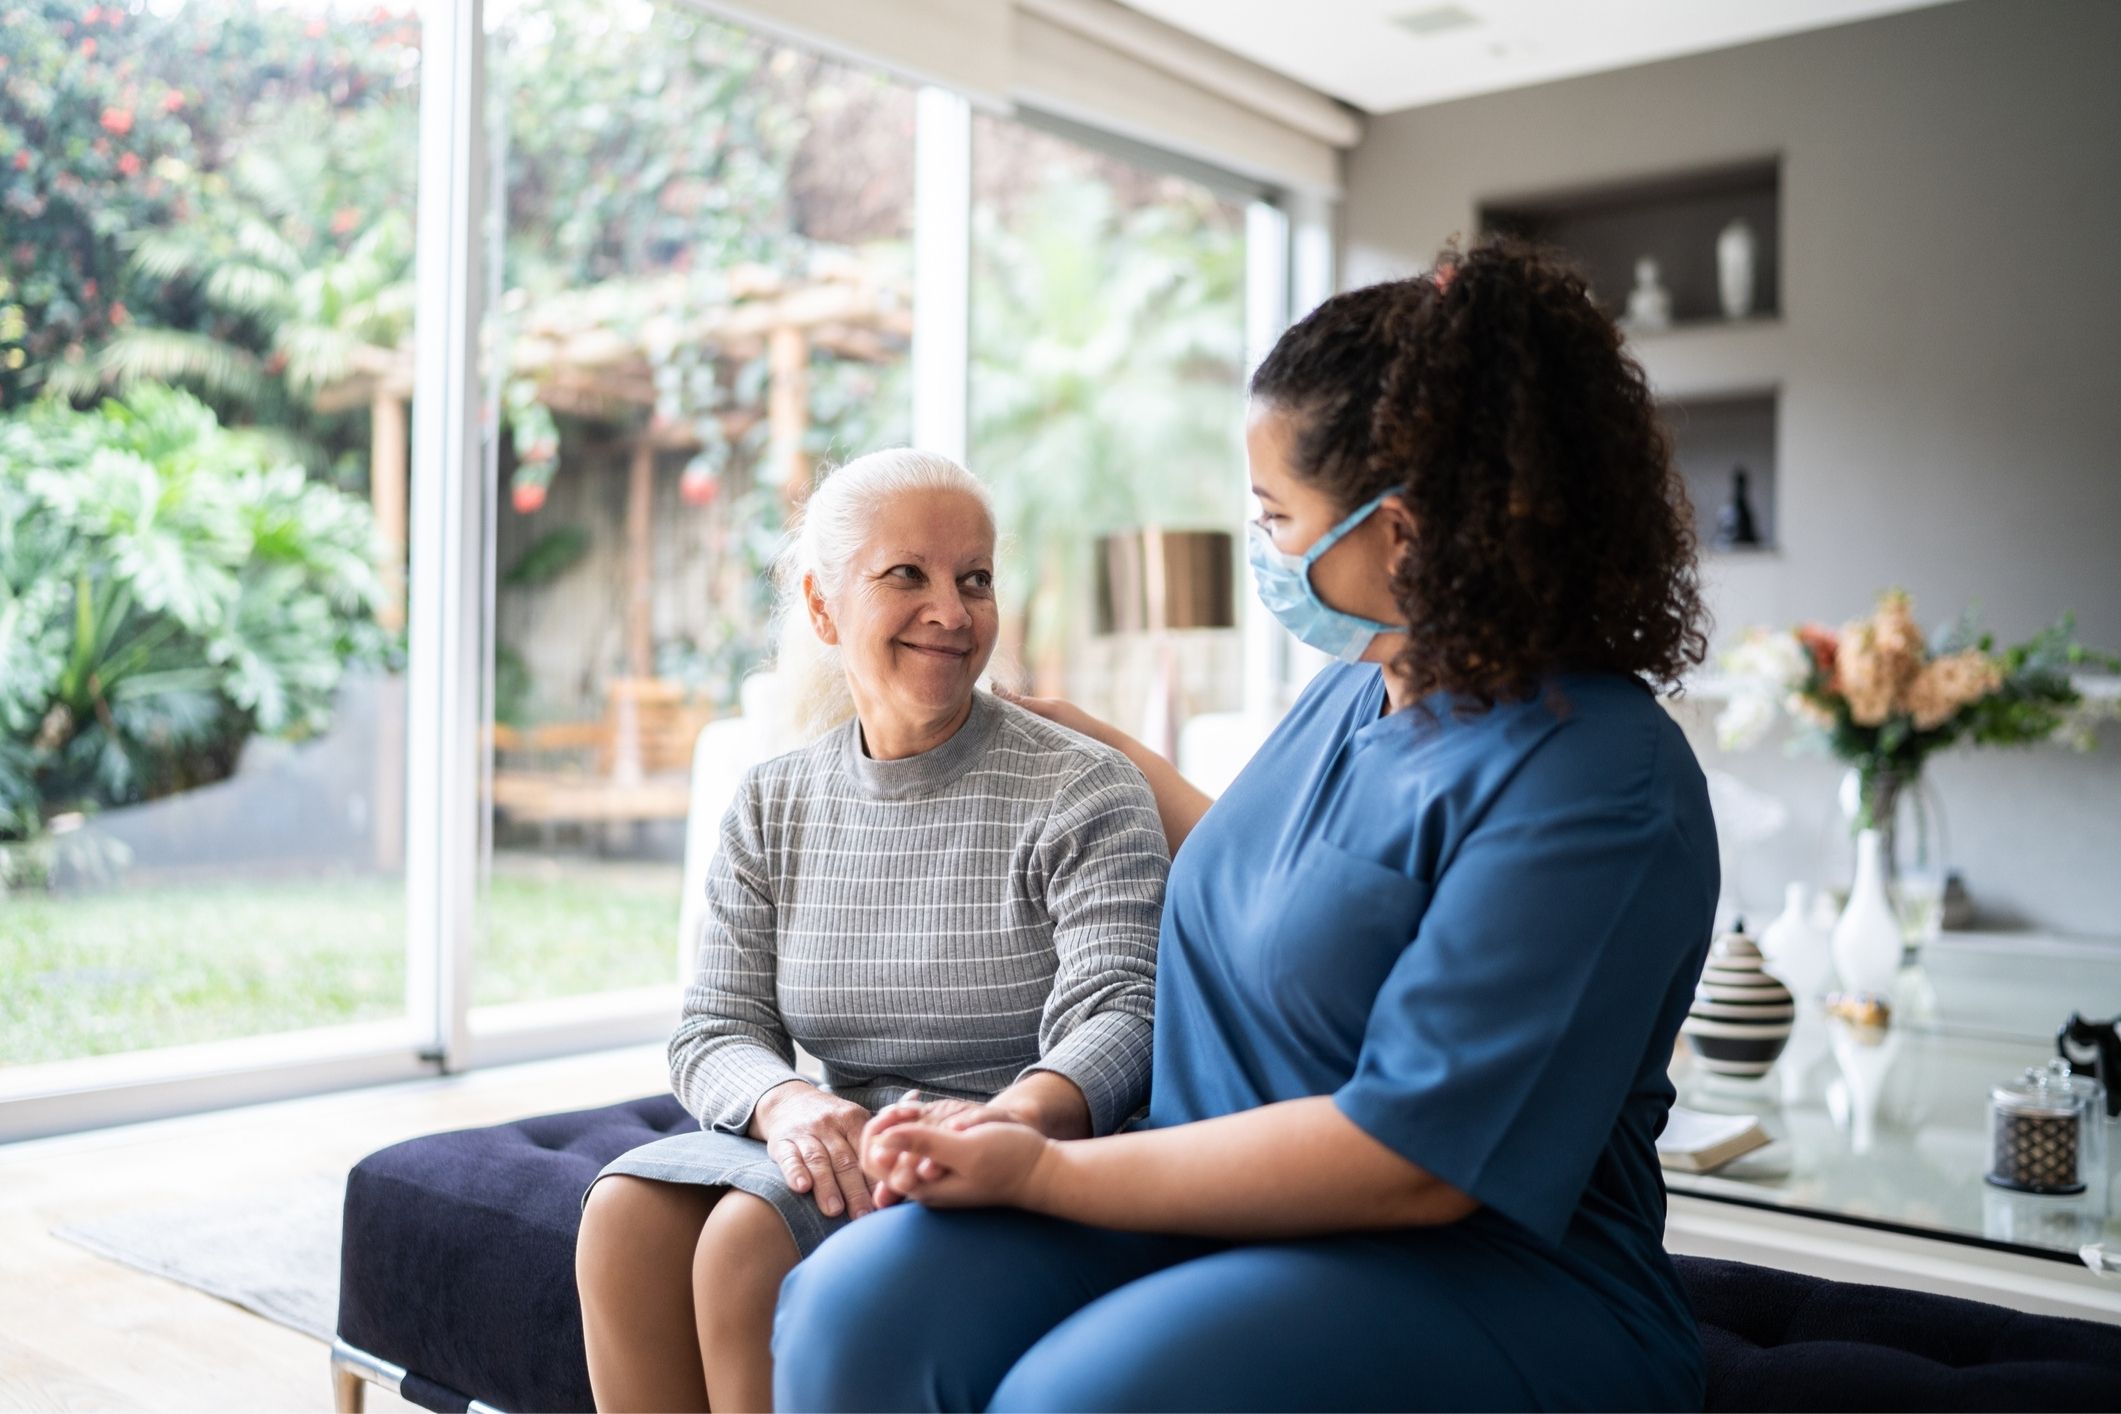 Reform to in-home care